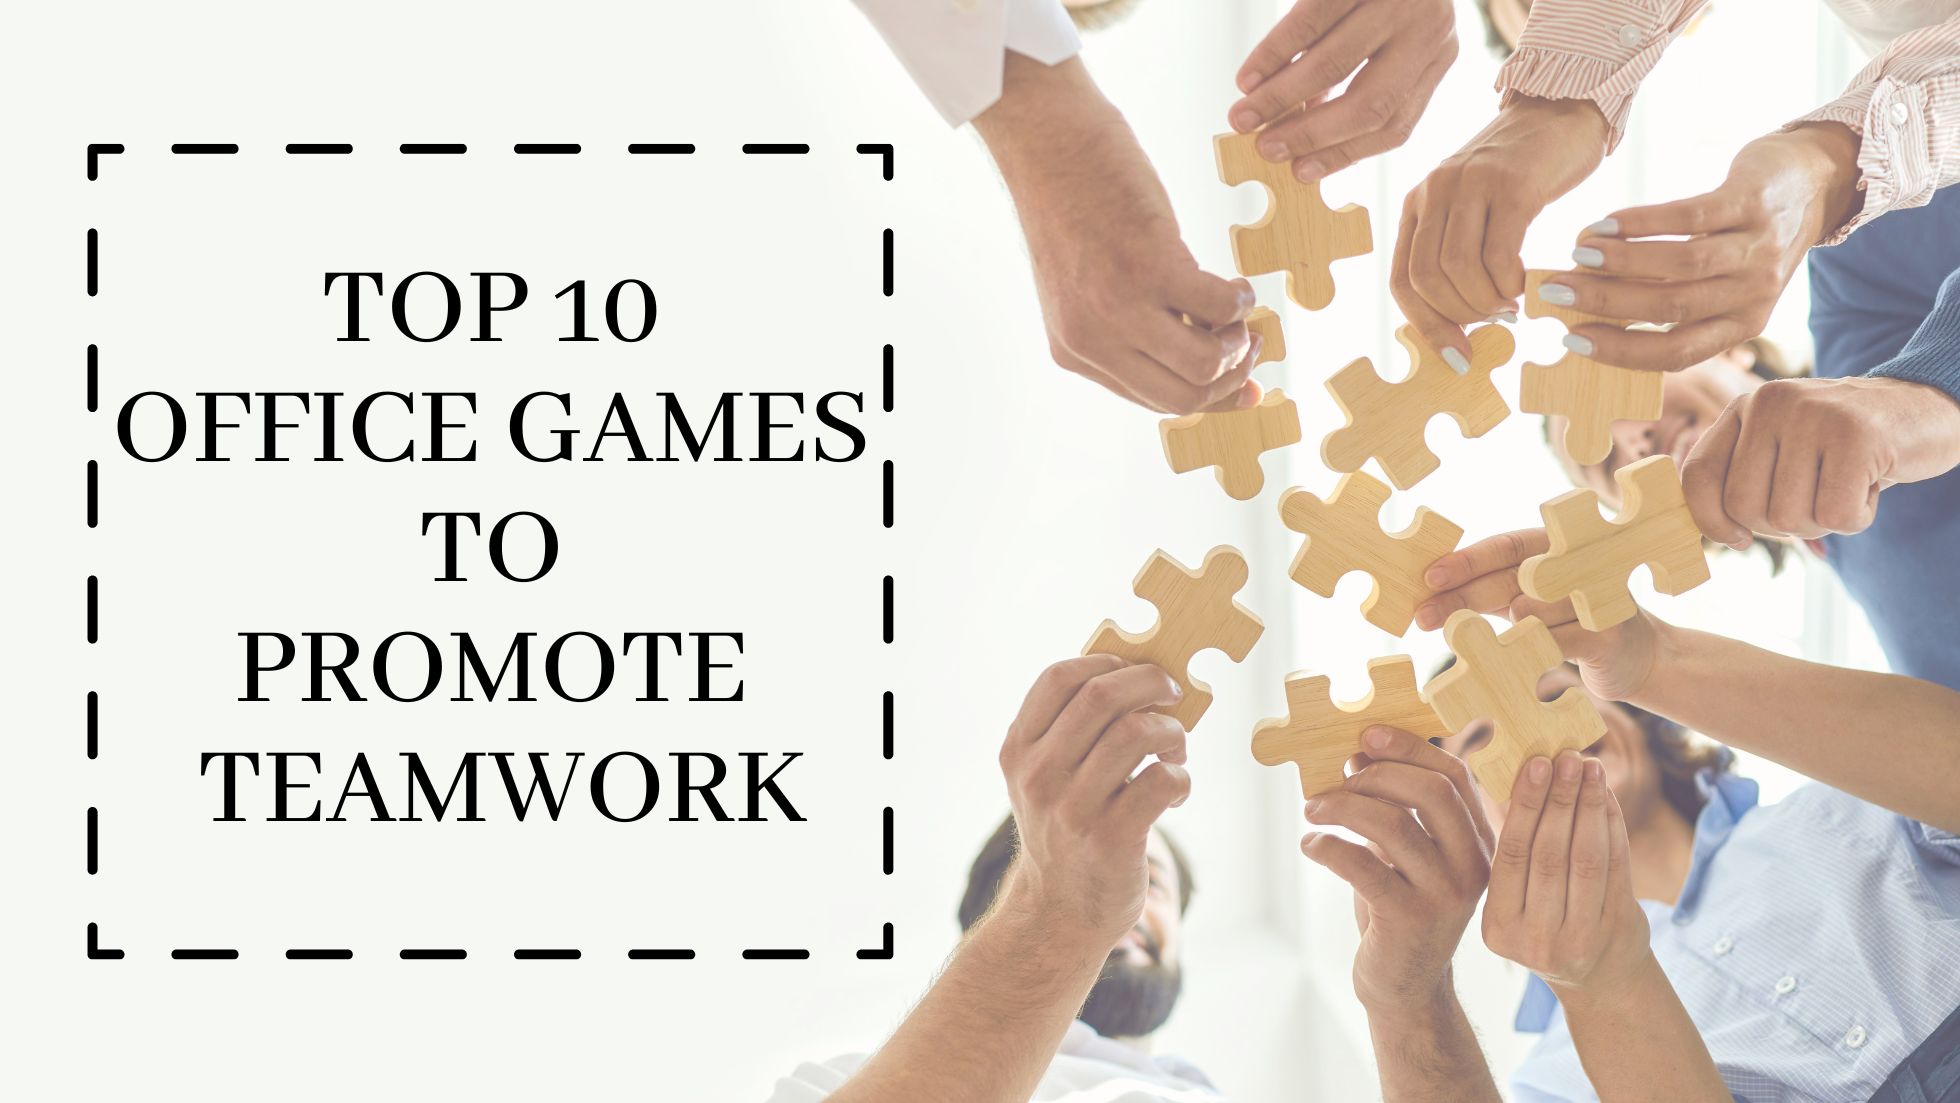 Top 10 office games to promote teamwork